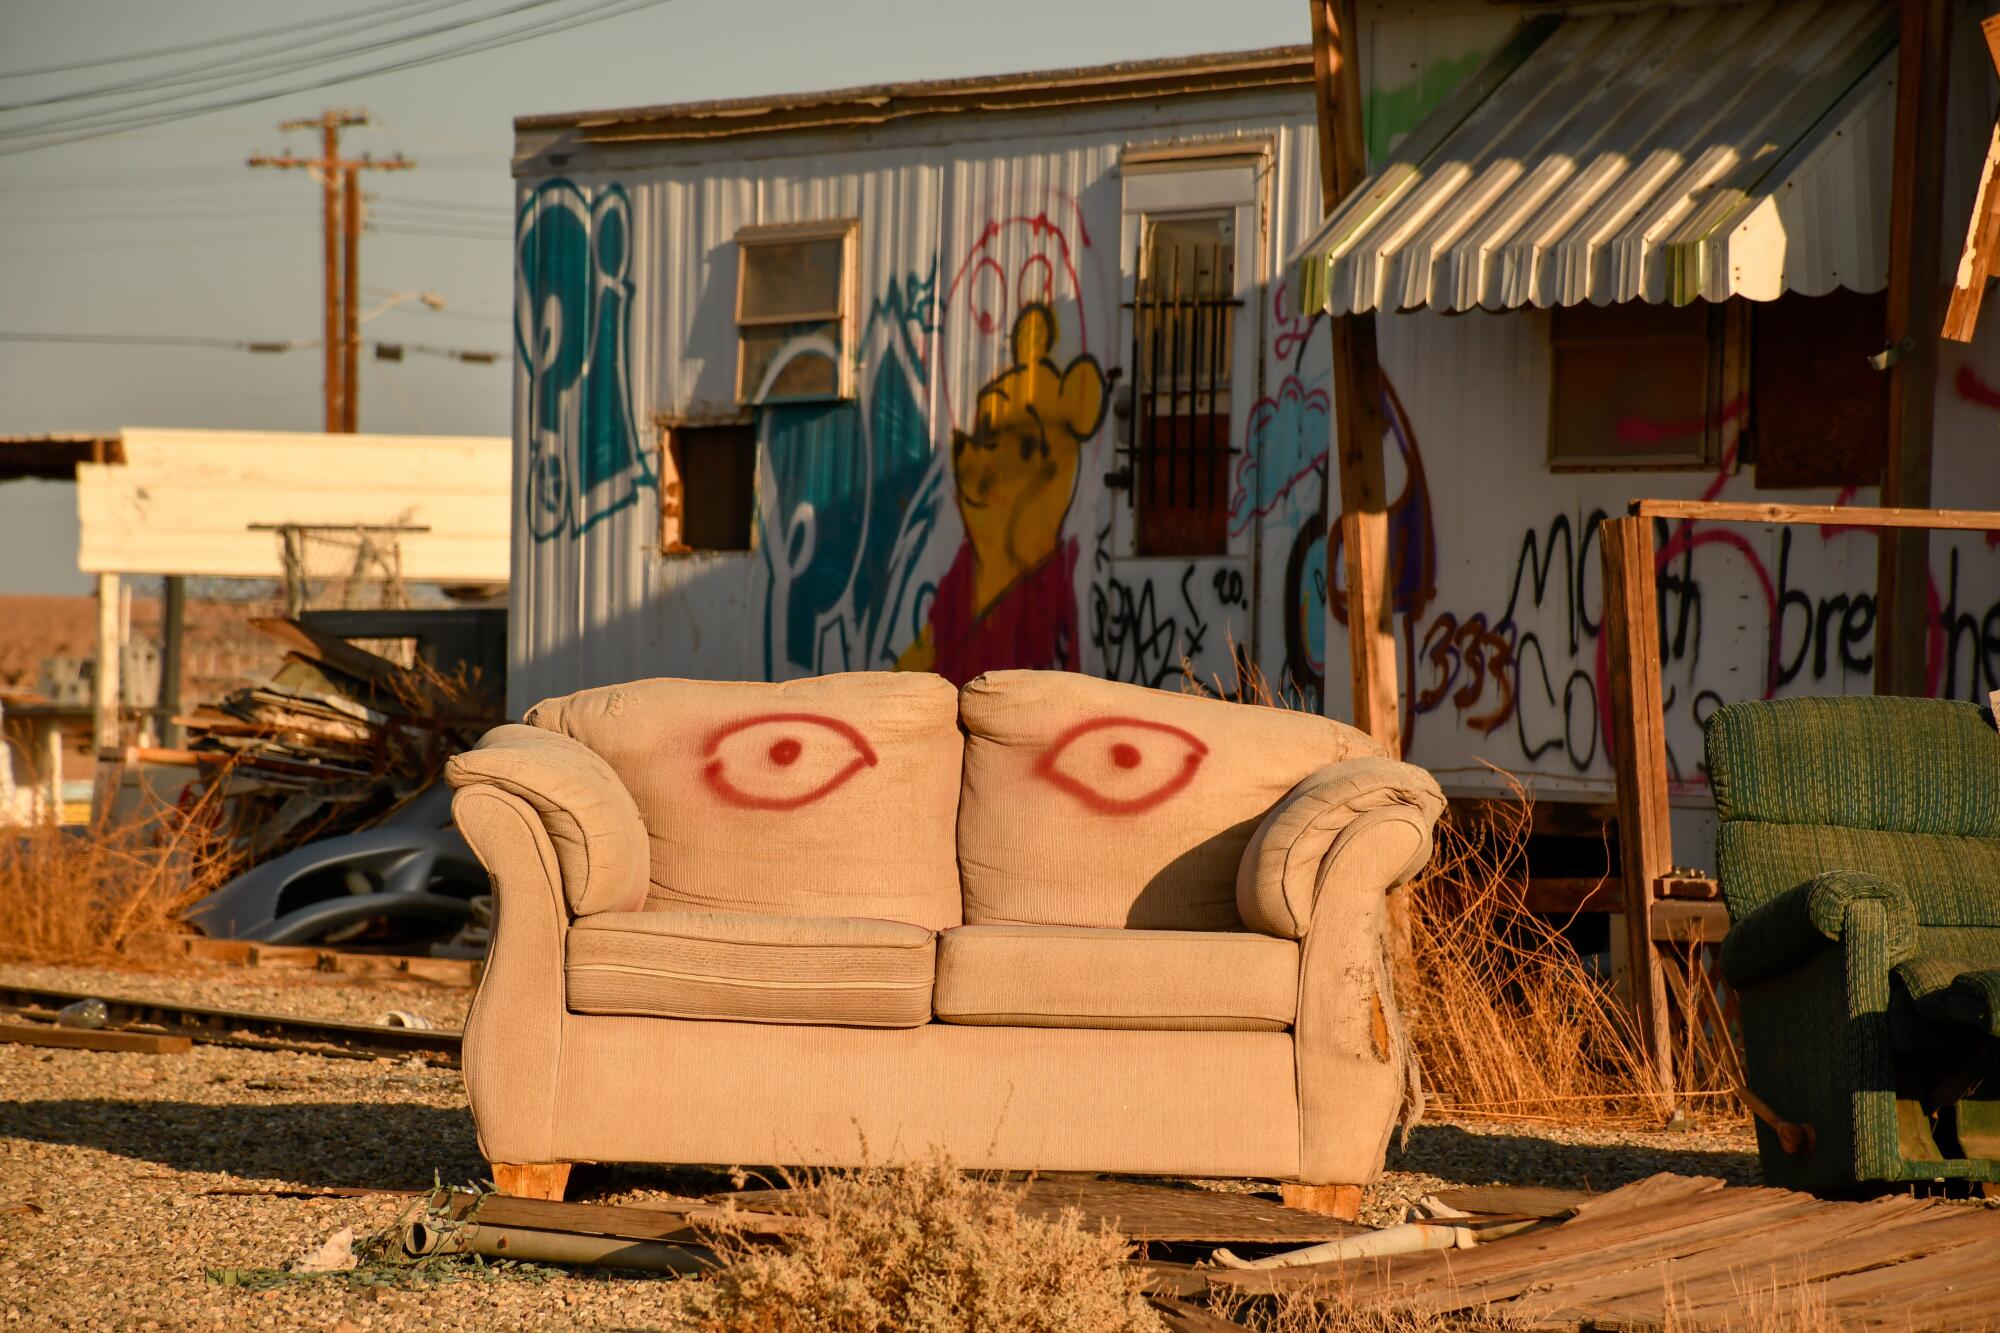 An abandoned couch in Bombay Beach, a community of artists and retirees.